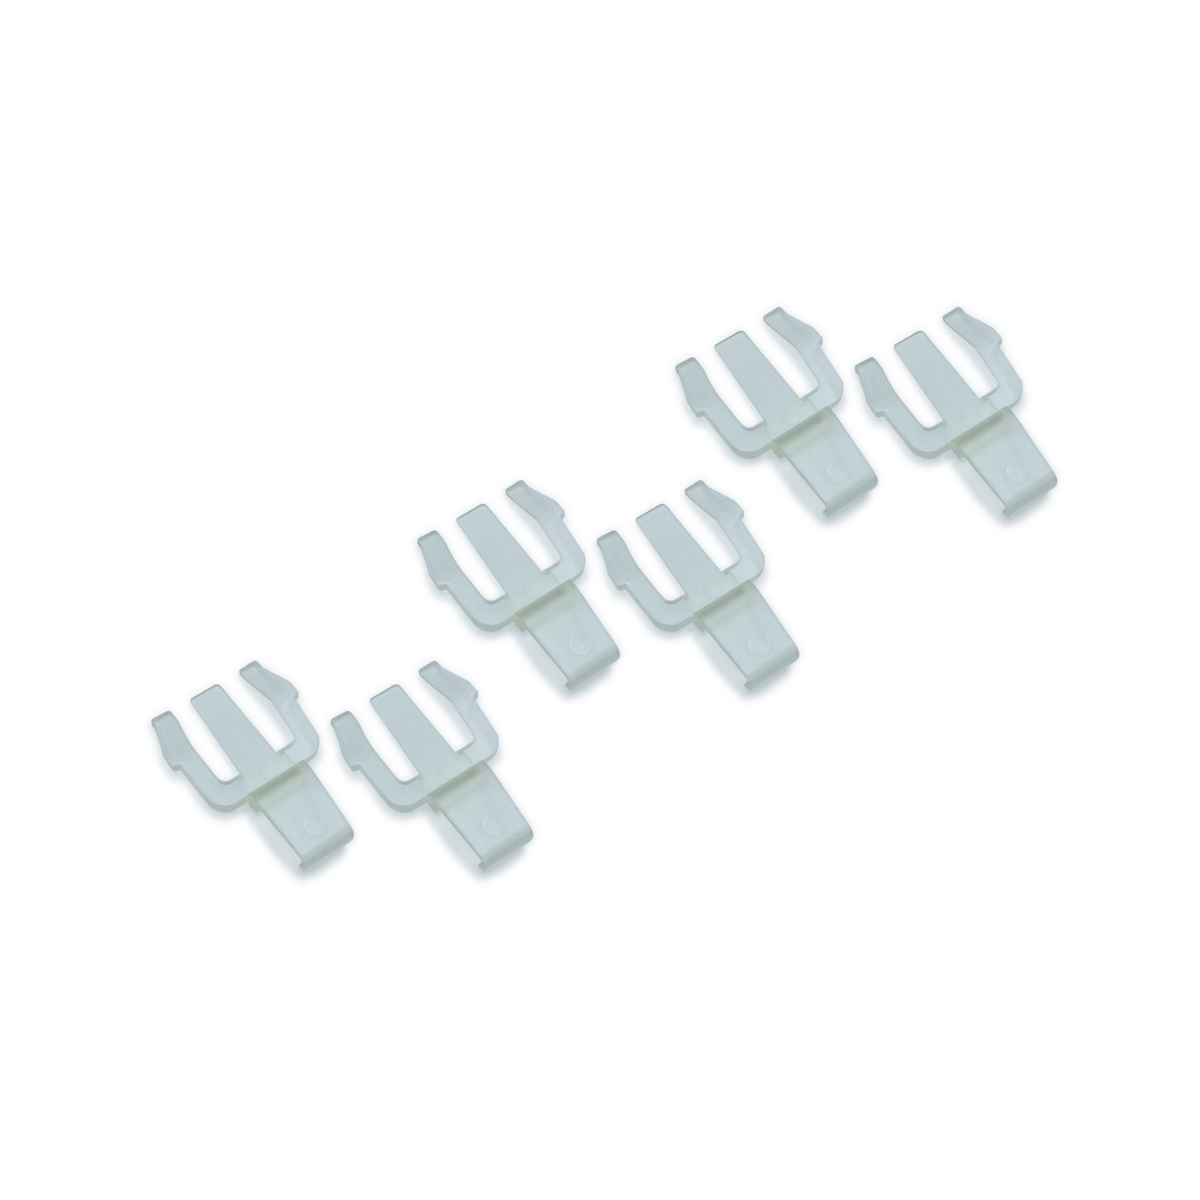 RealWear Hard Hat Clips (3 Pair Pack)